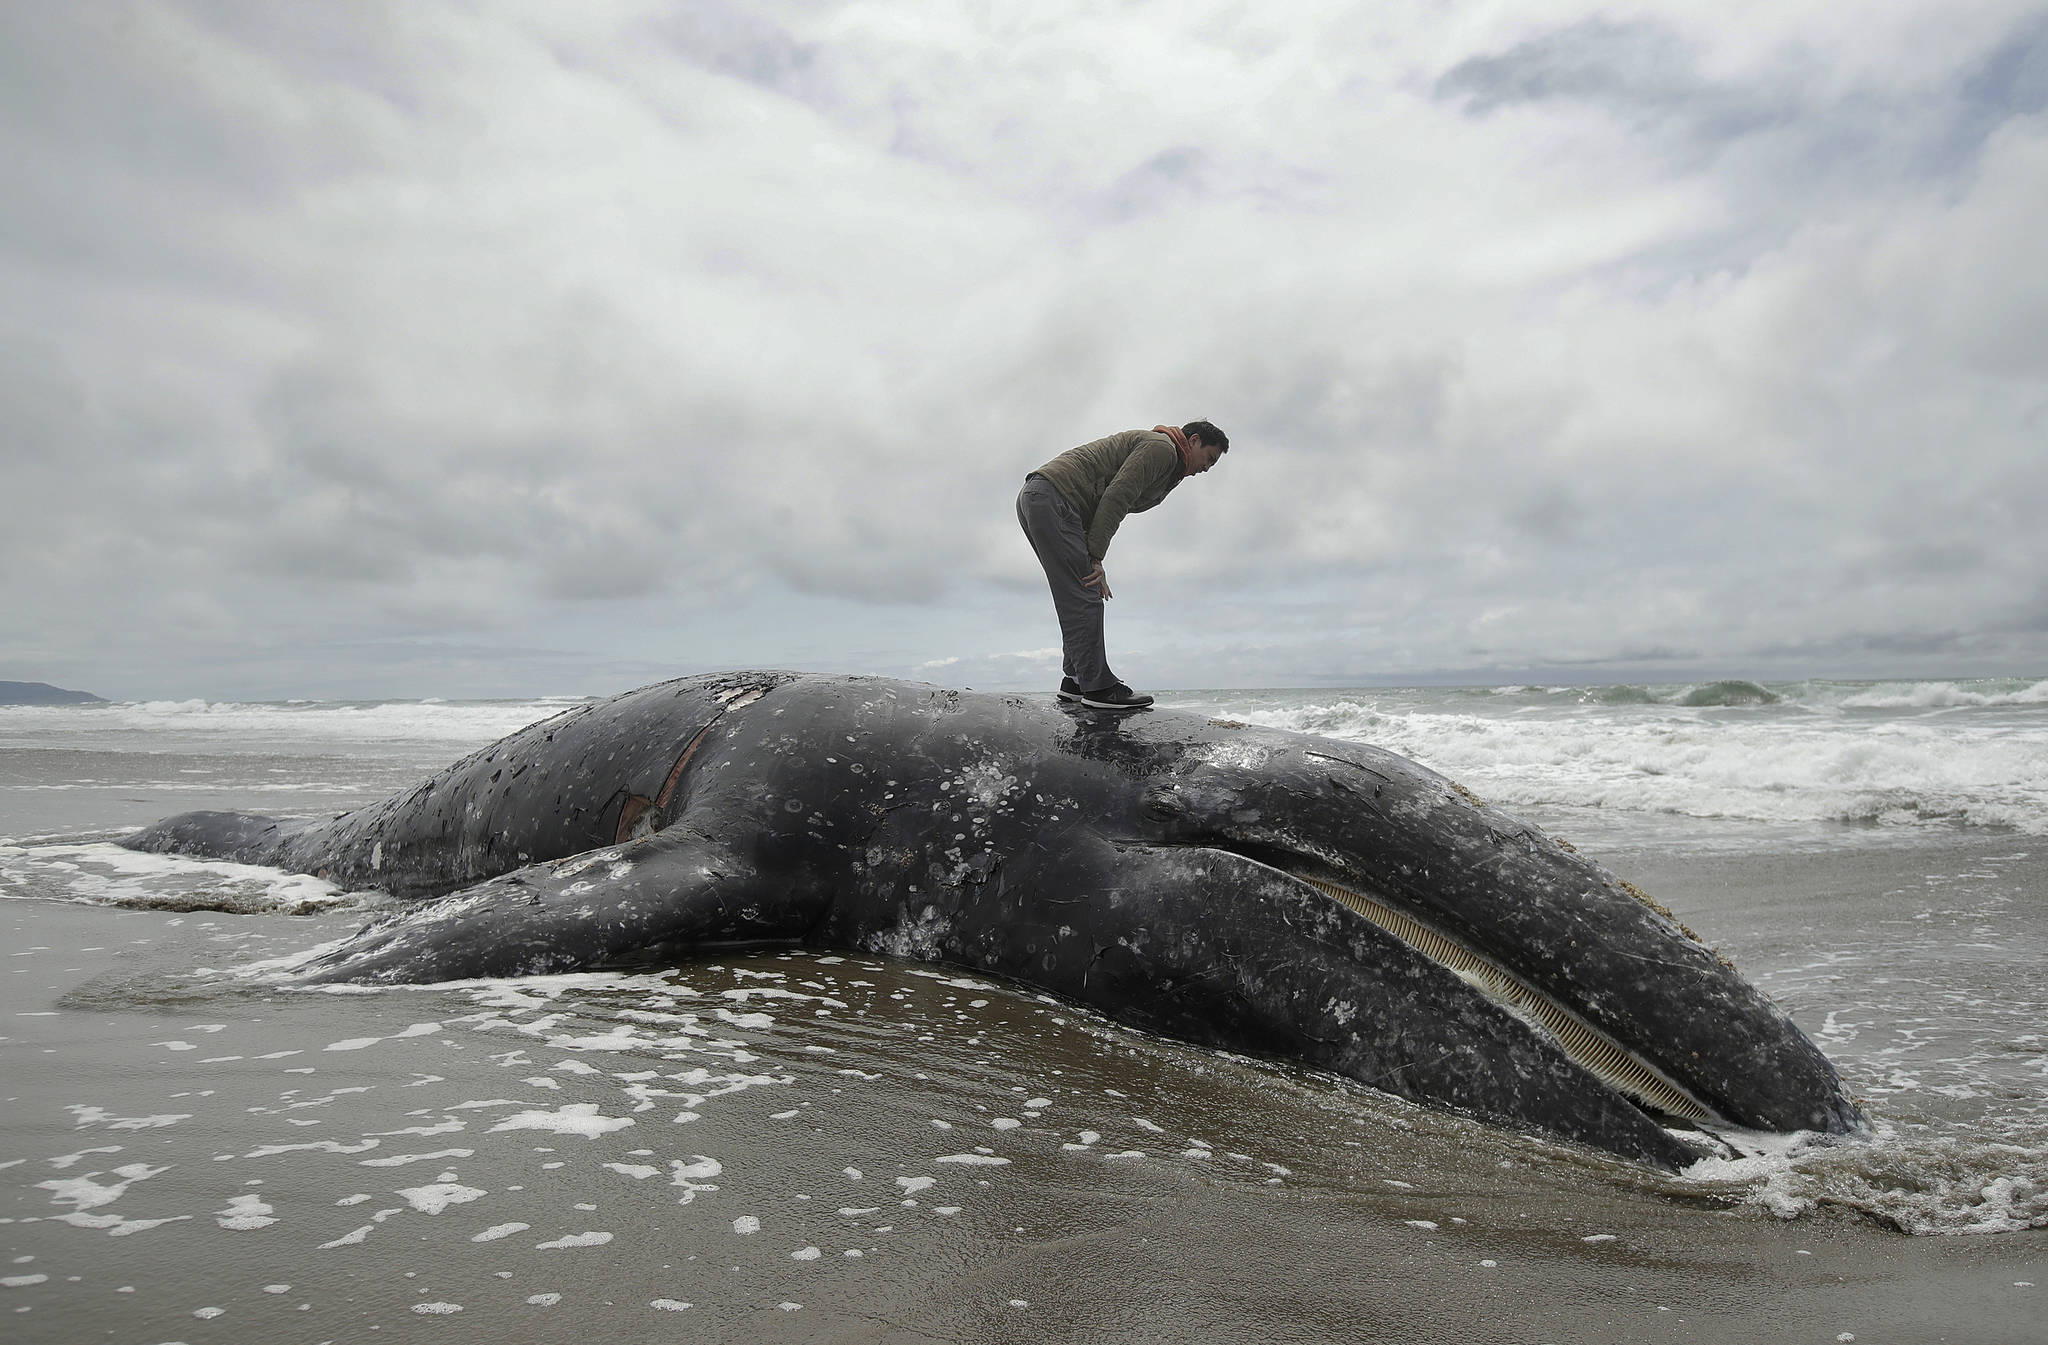 FILE - In this May 6, 2019 file photo, Duat Mai stands atop a dead whale at Ocean Beach in San Francisco. Federal scientists on Friday, May 31 opened an investigation into what is causing a spike in gray whale deaths along the West Coast this year. So far, about 70 whales have stranded on the coasts of Washington, Oregon, Alaska and California, the most since 2000. (AP Photo/Jeff Chiu)